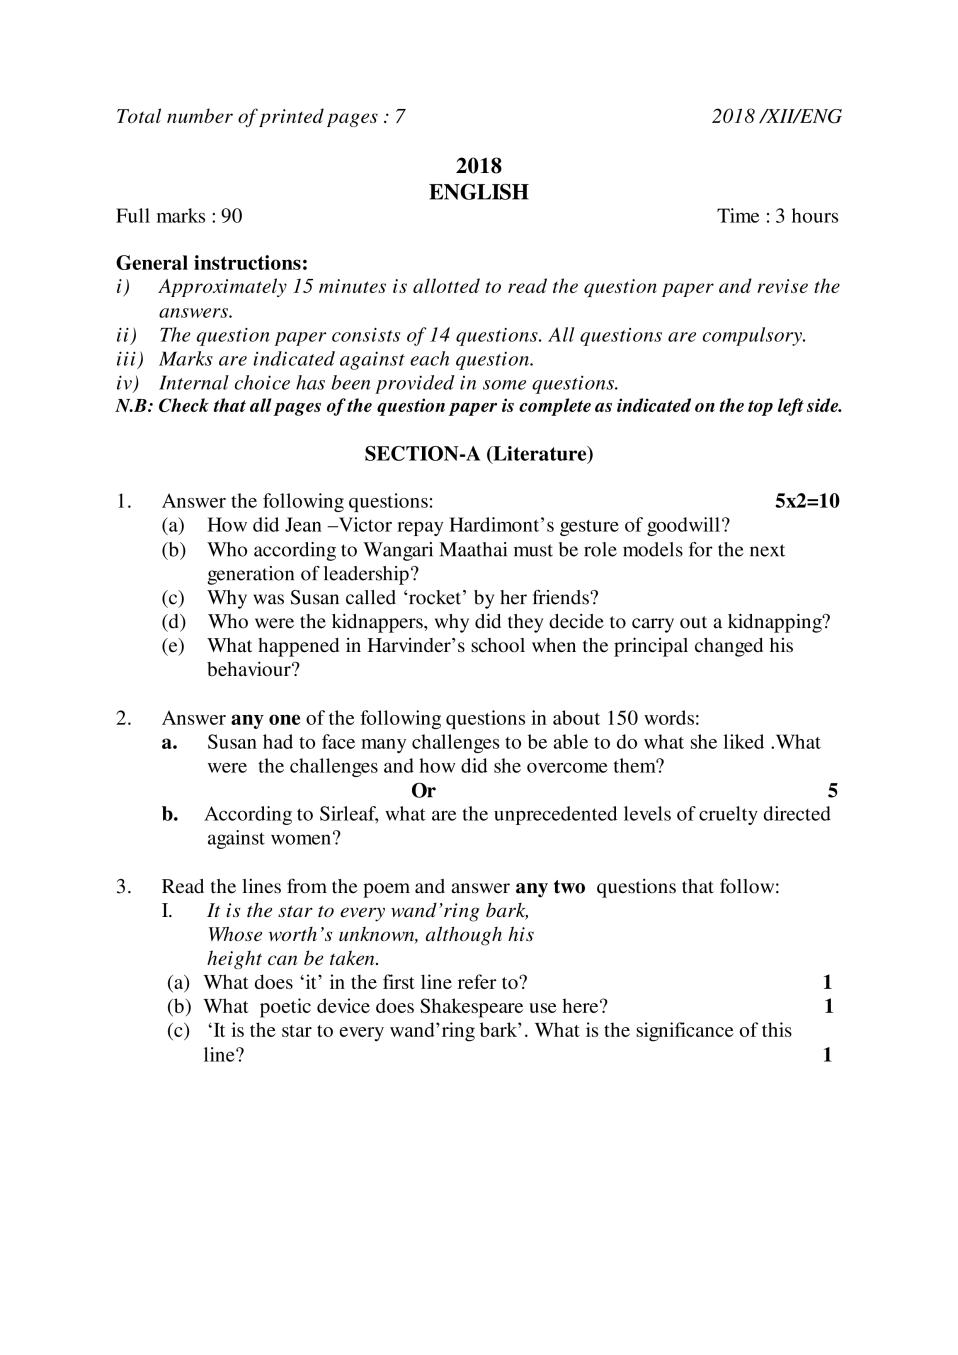 NBSE Class 12 Question Paper 2018 for English - Page 1